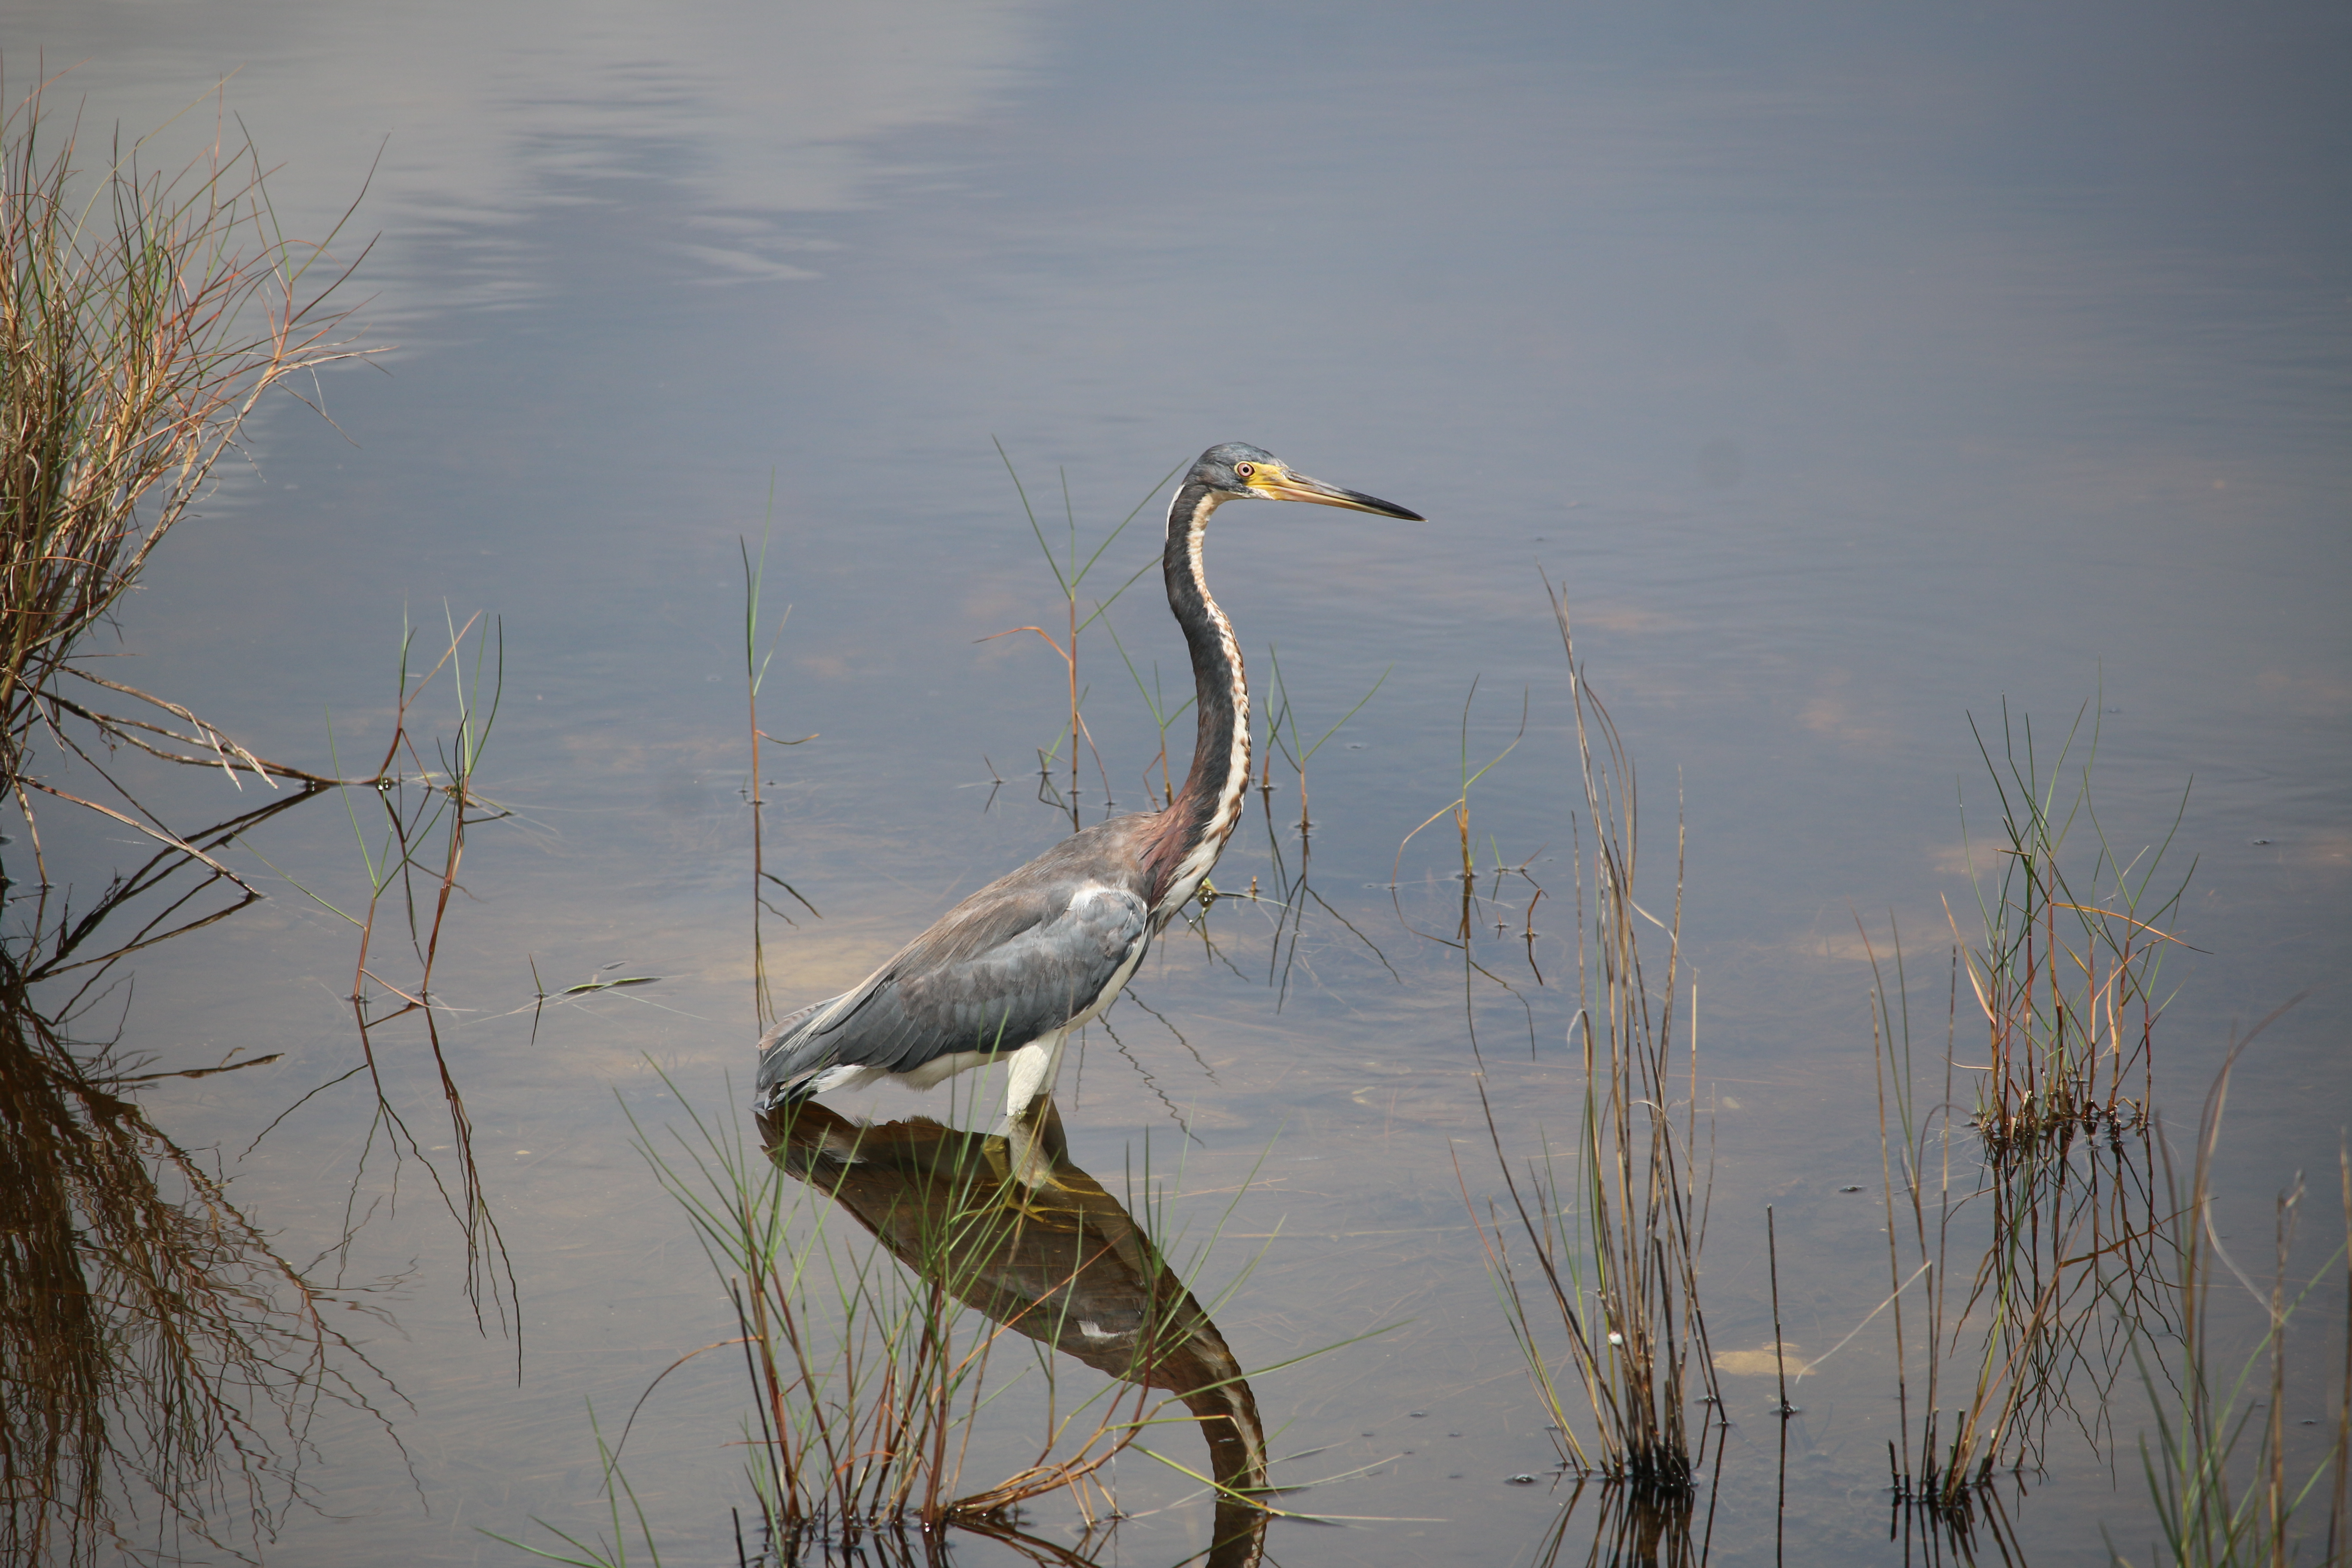 Tricolored Heron standing in shallow, calm water.